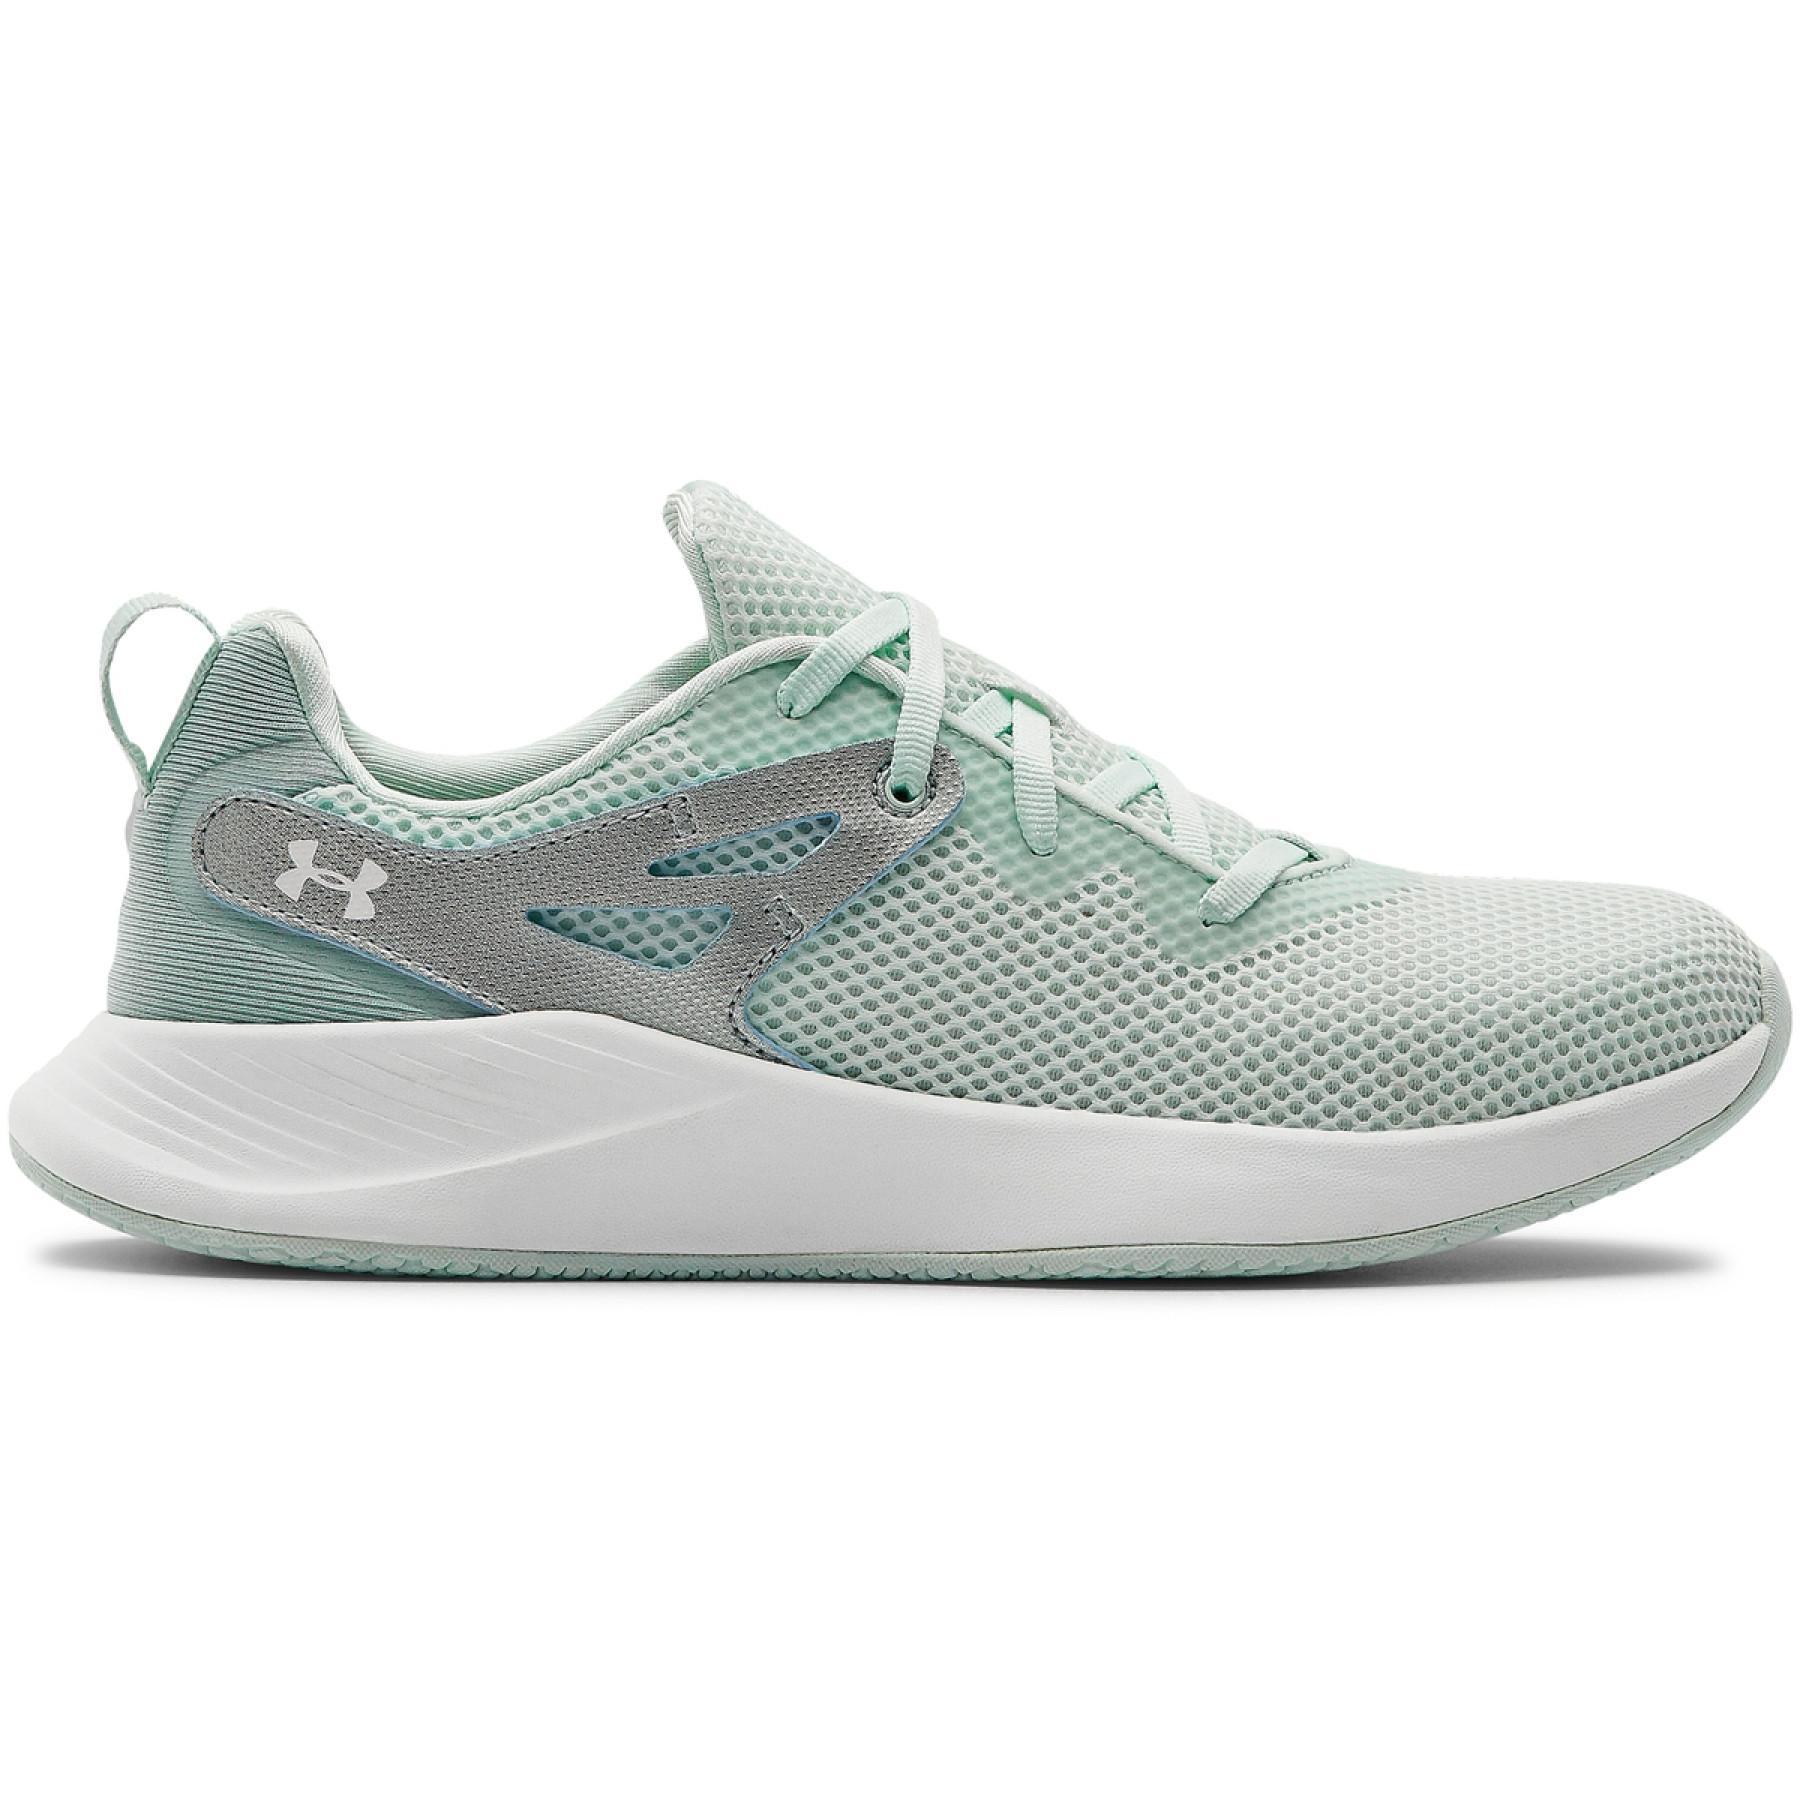 Women's training shoes Under Armour Charged Breathe Trainer 2 NM